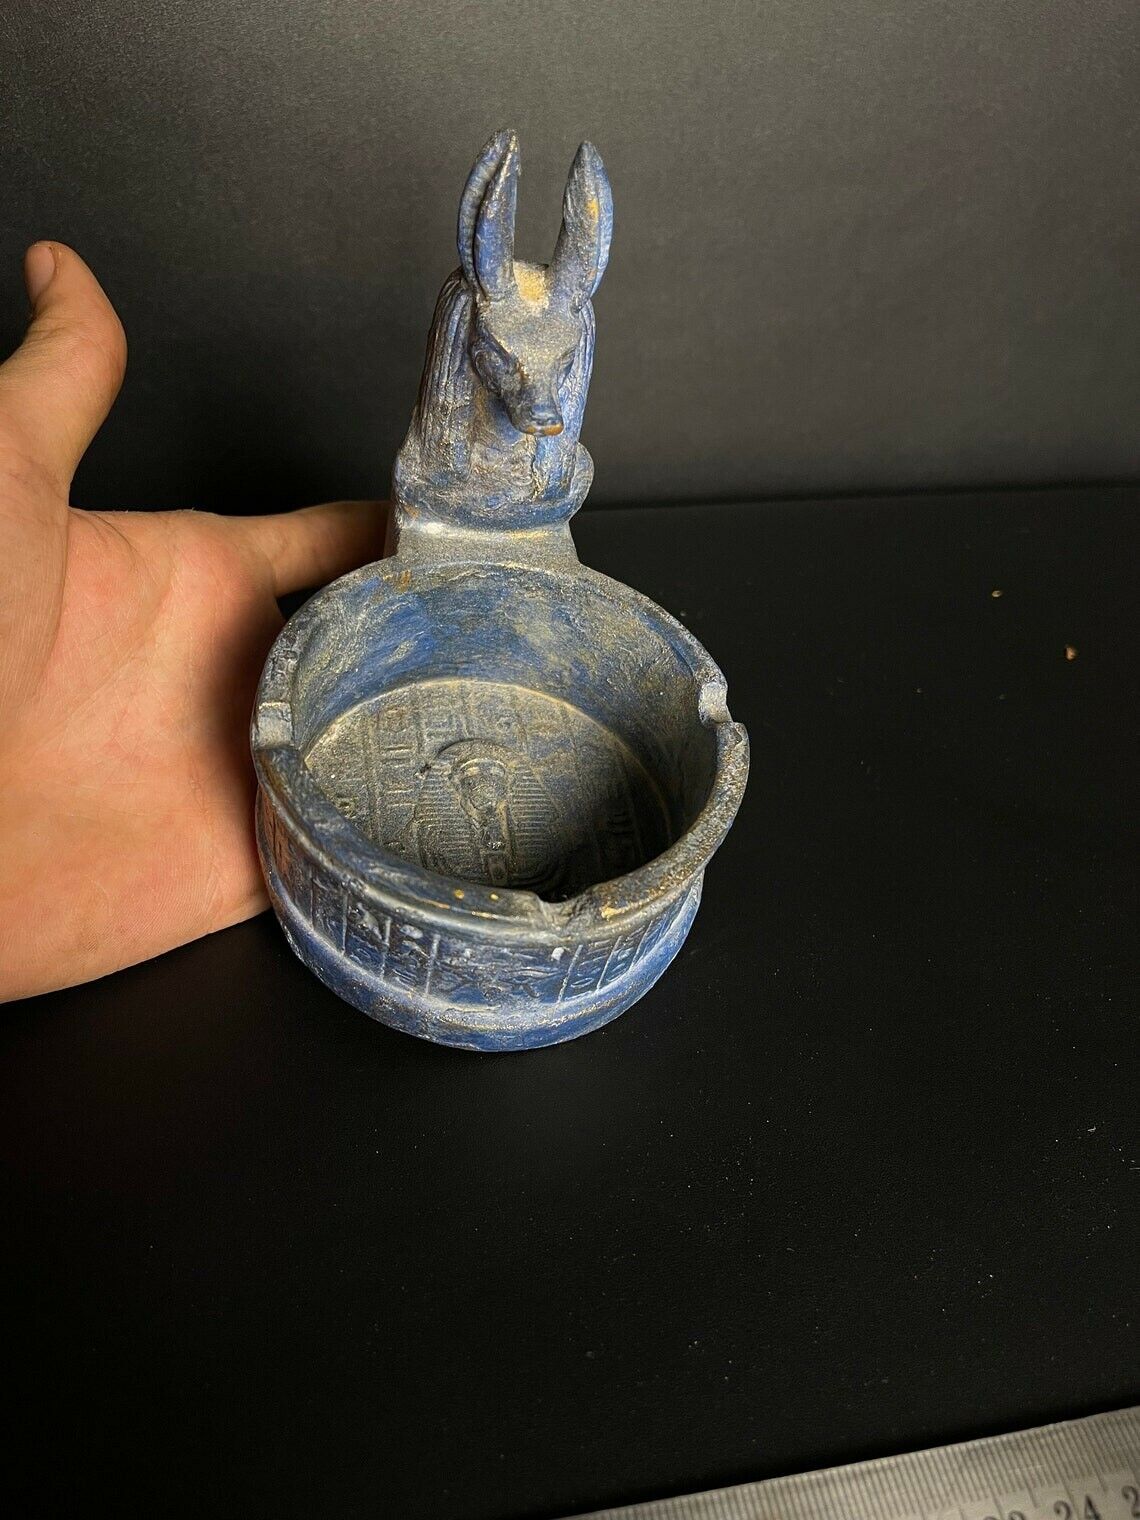 Marvelous Anubis Ash Tray Carved from Blue Stone with Egyptian Hieroglyphs